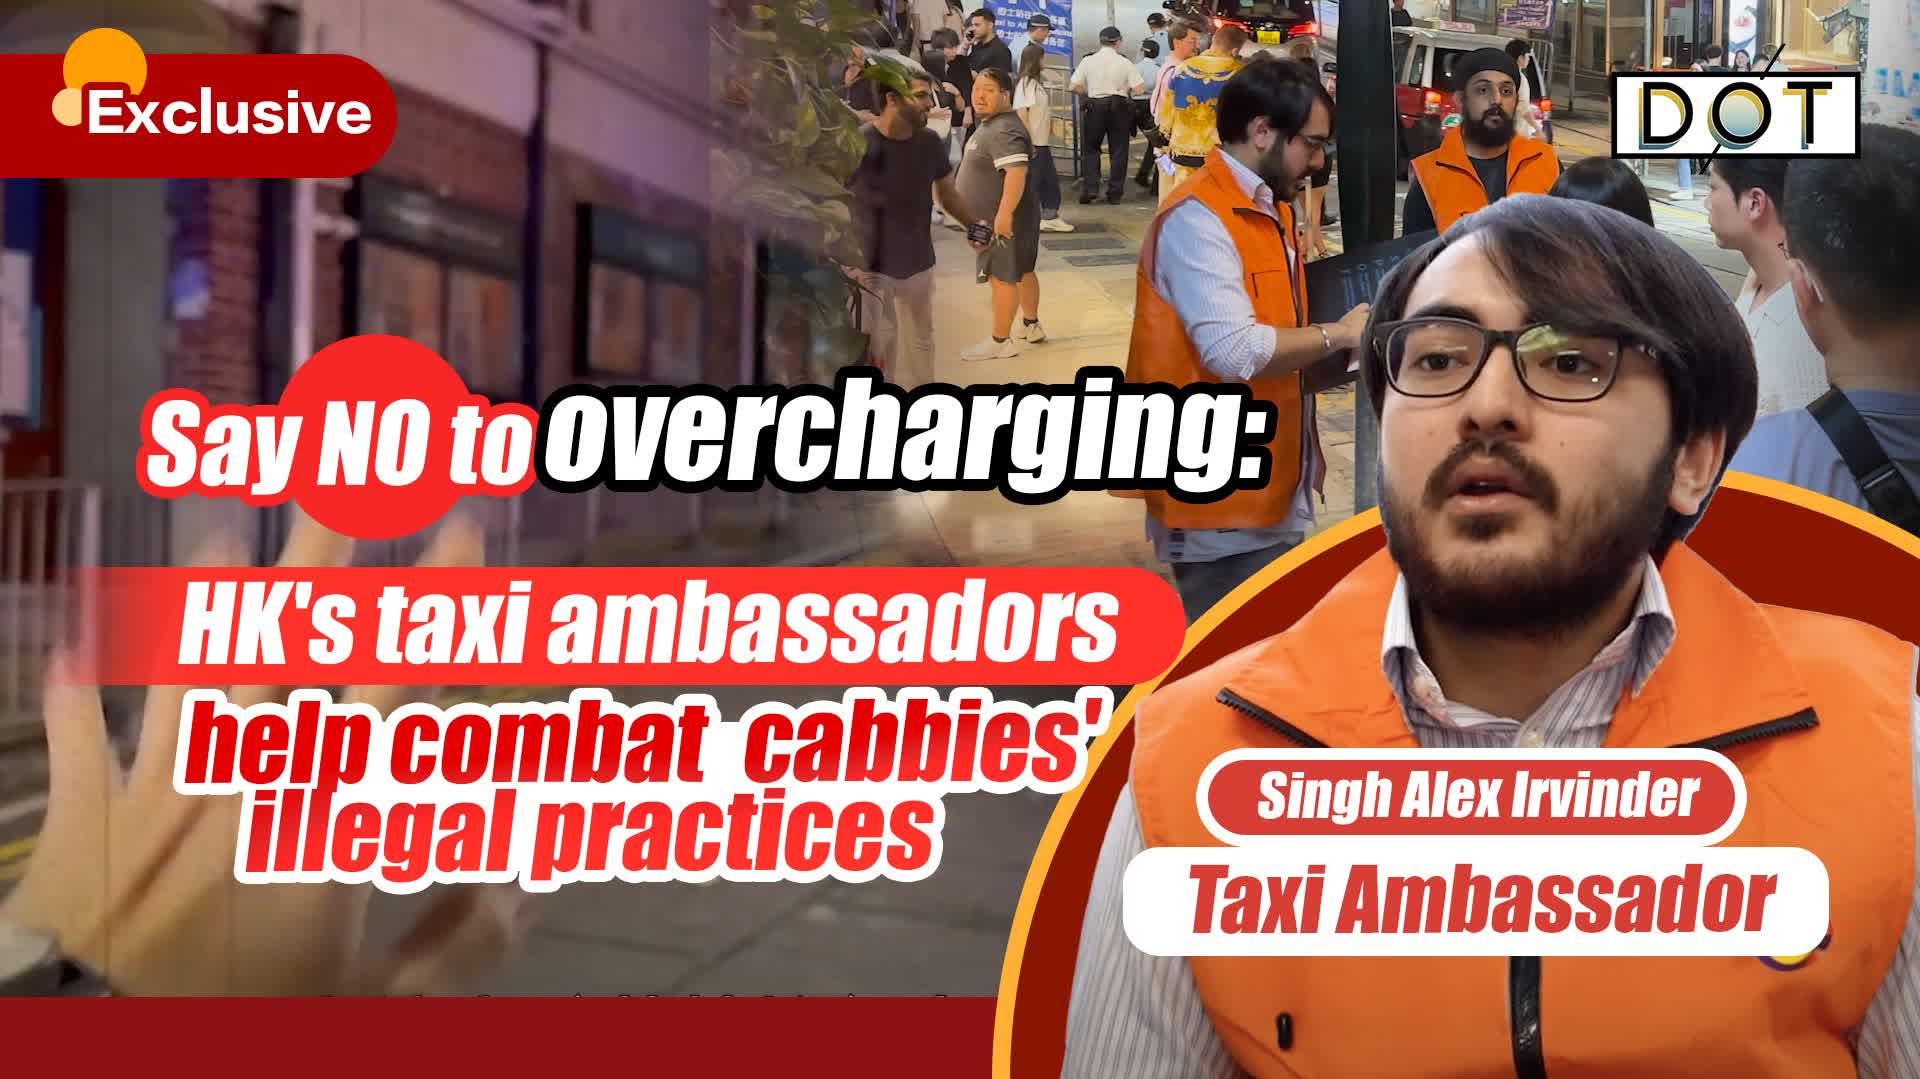 Exclusive | Say NO to overcharging: HK's taxi ambassadors help combat cabbies' illegal practices